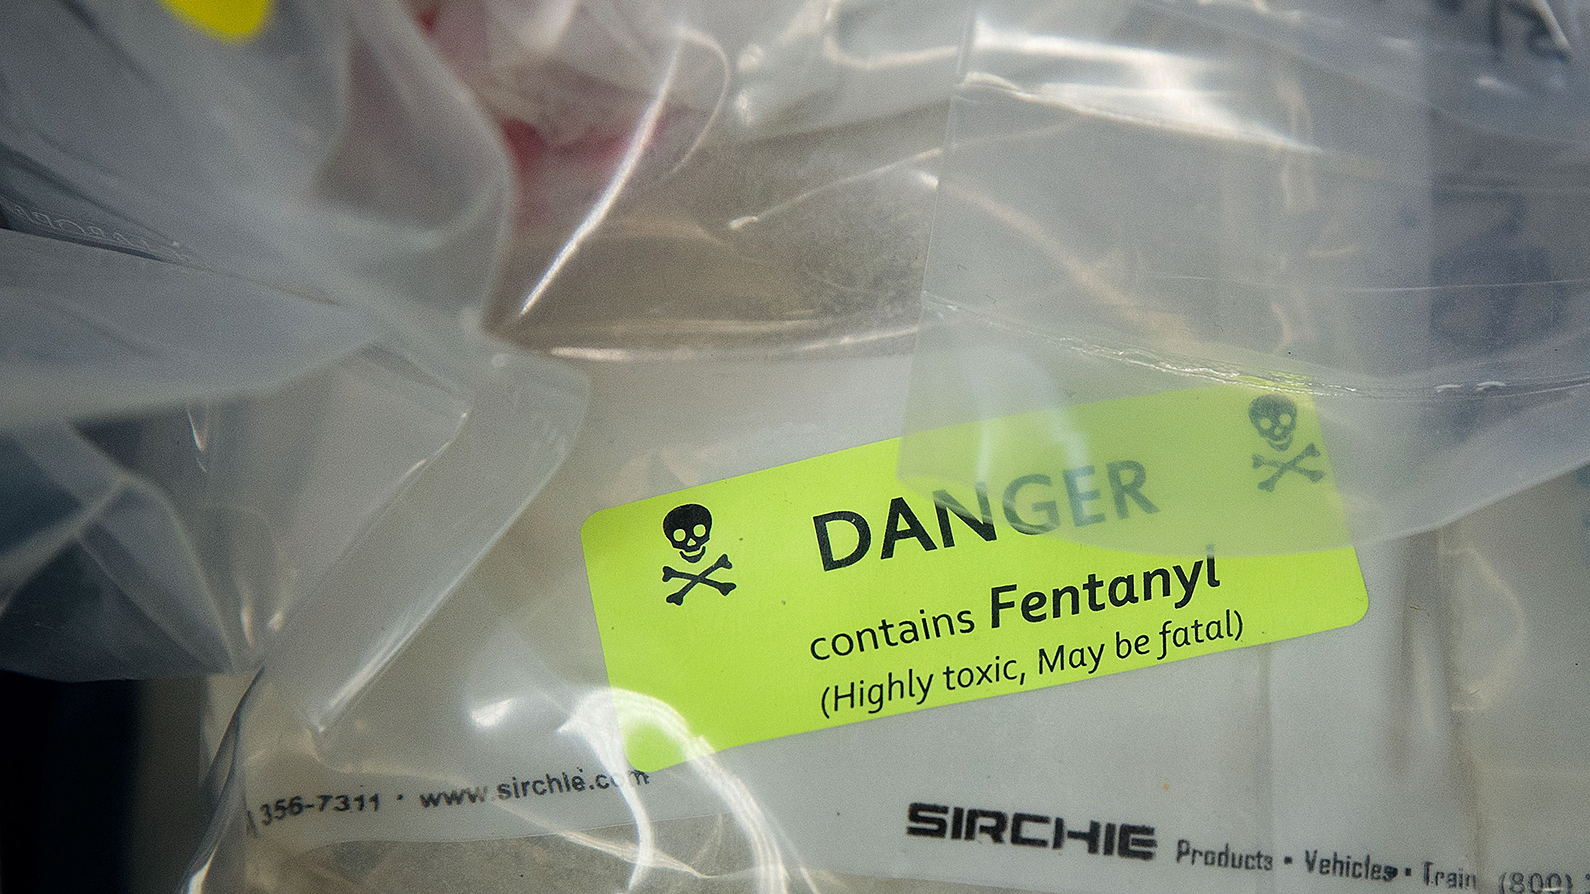 Bags of heroin, some laced with fentanyl